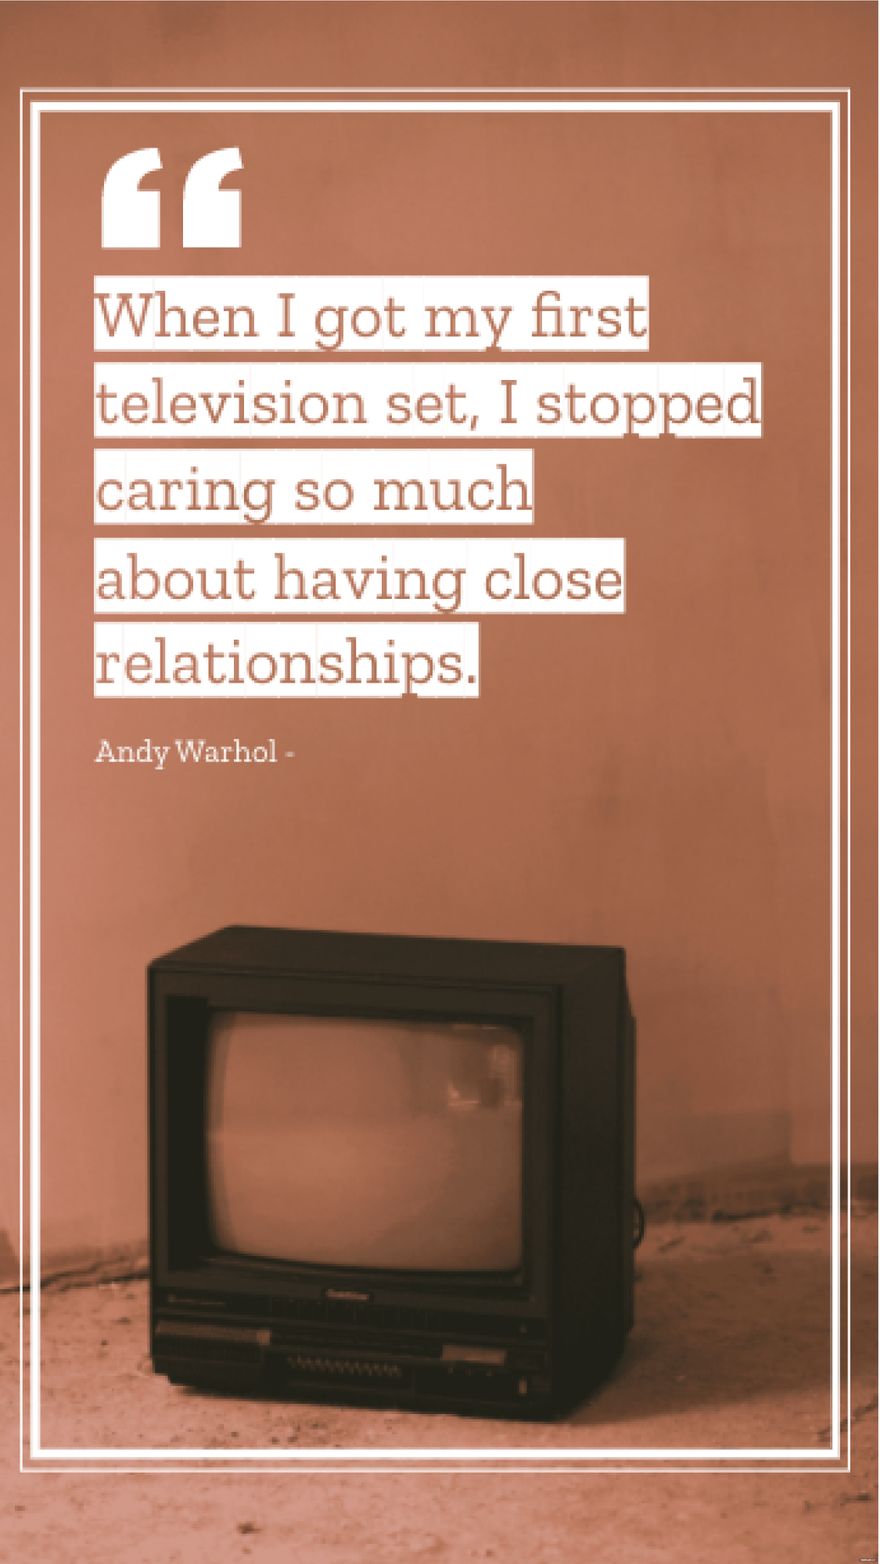 Andy Warhol - When I got my first television set, I stopped caring so much about having close relationships.